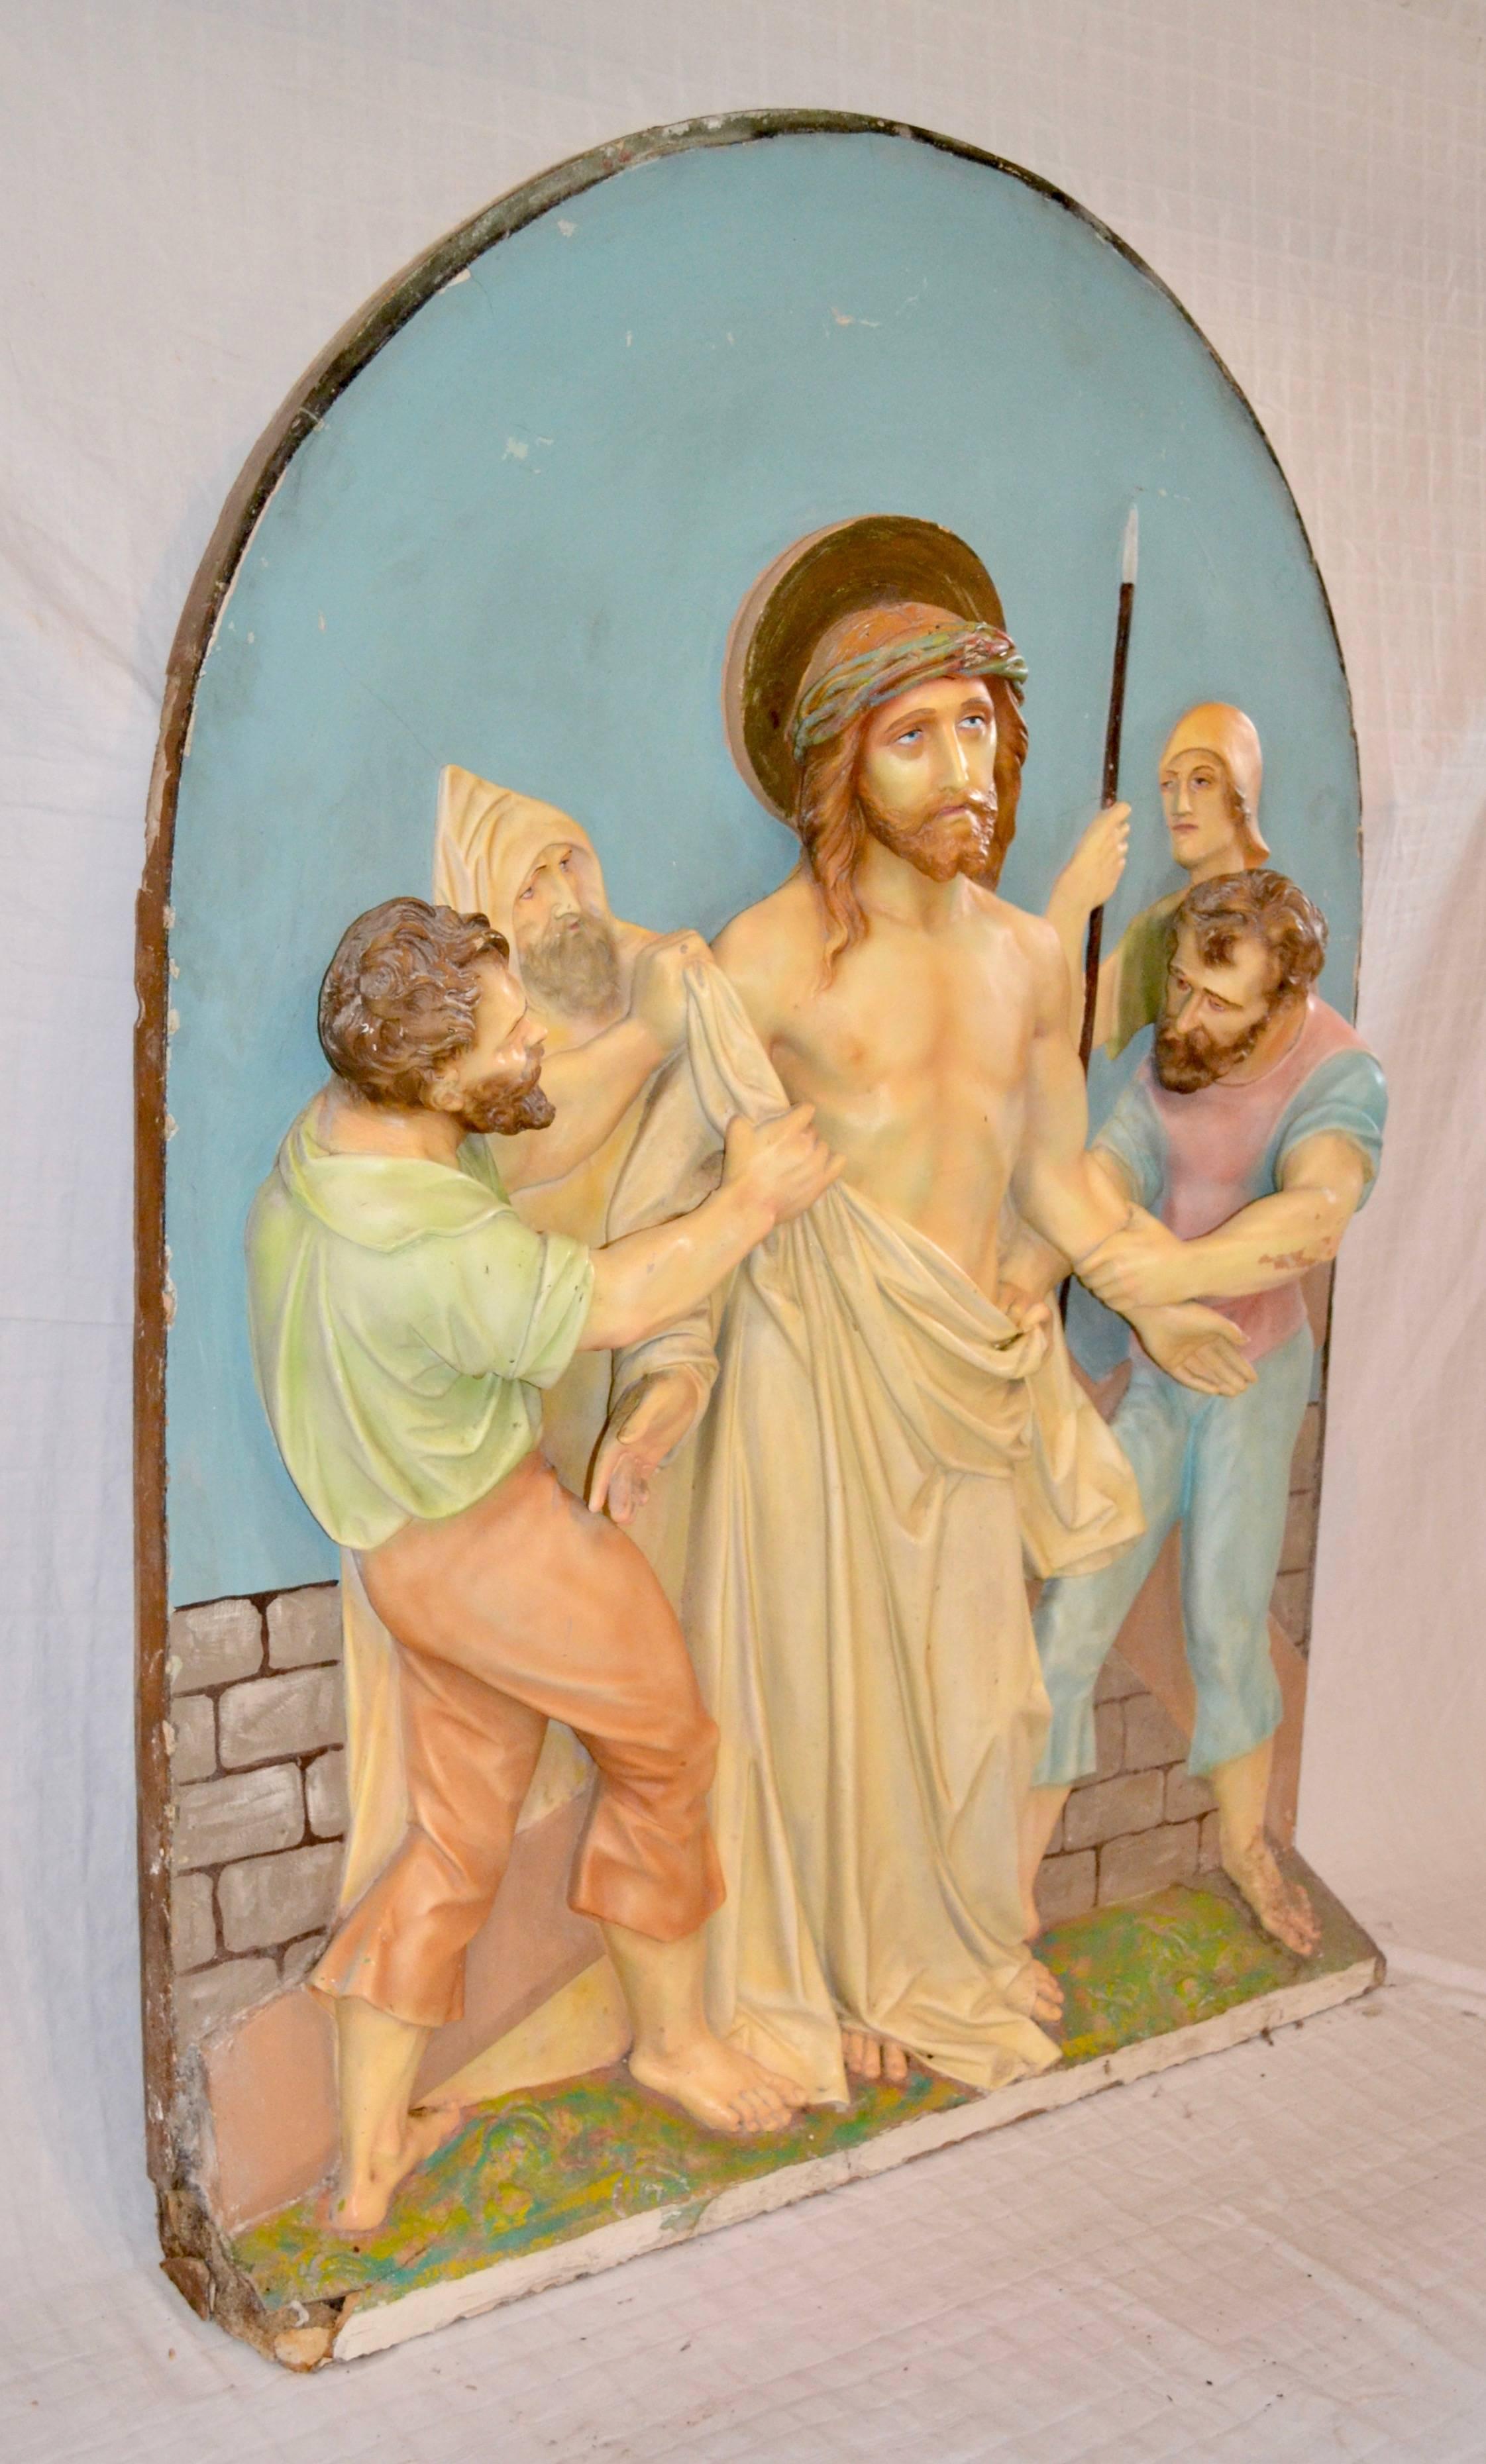 These unusual stations of the Cross are possibly by De Prado Studios.
The panels are in good condition with some minor losses. The vibrant colors are consistent with and characteristic of of a midcentury repaint. Shown here is one panel of eight